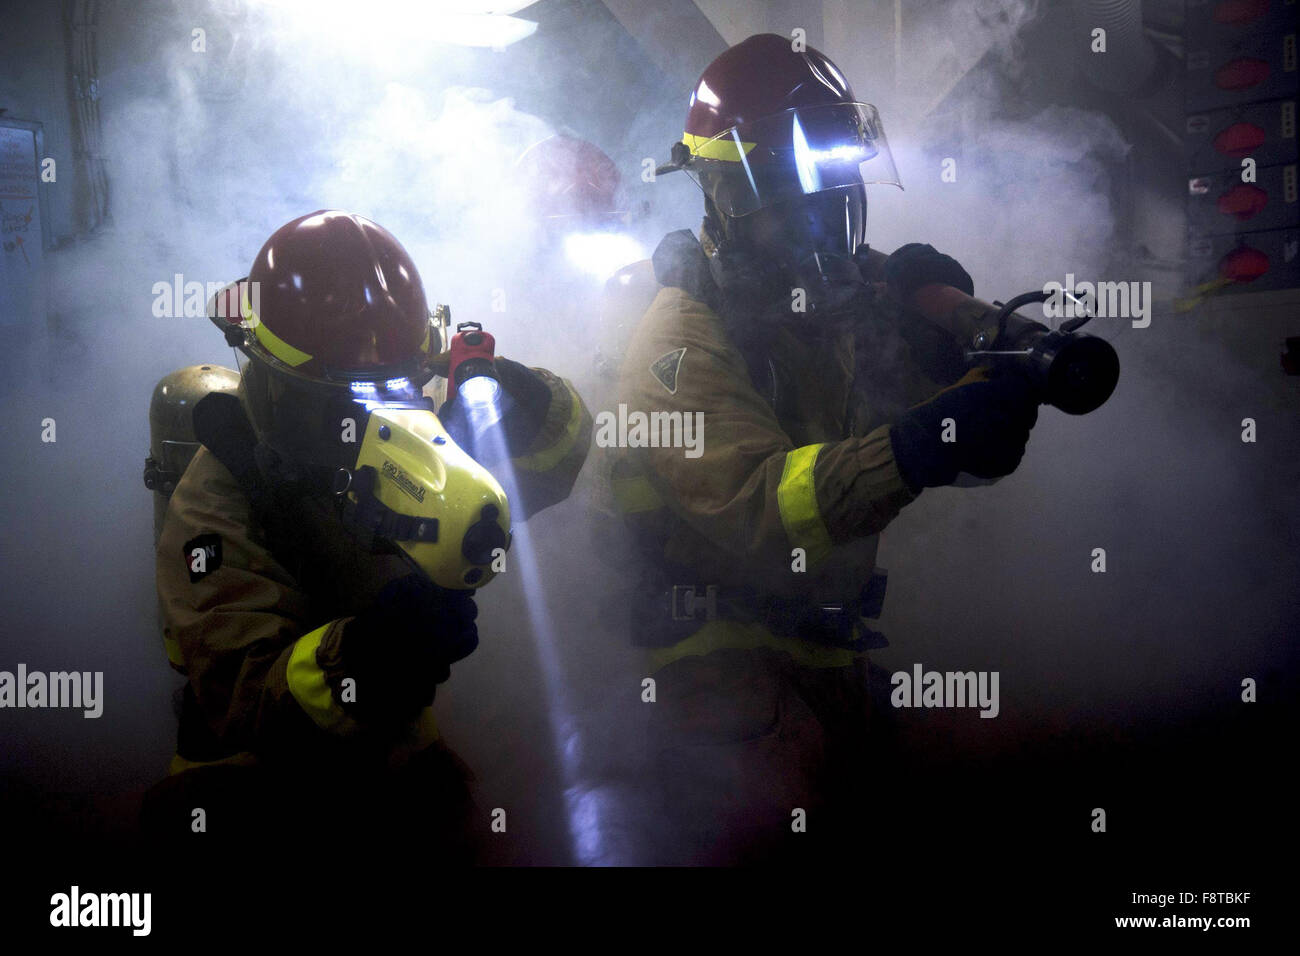 Damage Controlman 3rd Class R. Berens, left, and Damage Controlman D. Barber fight a simulated fire during a drill aboard the aircraft carrier USS Harry S. Truman Stock Photo